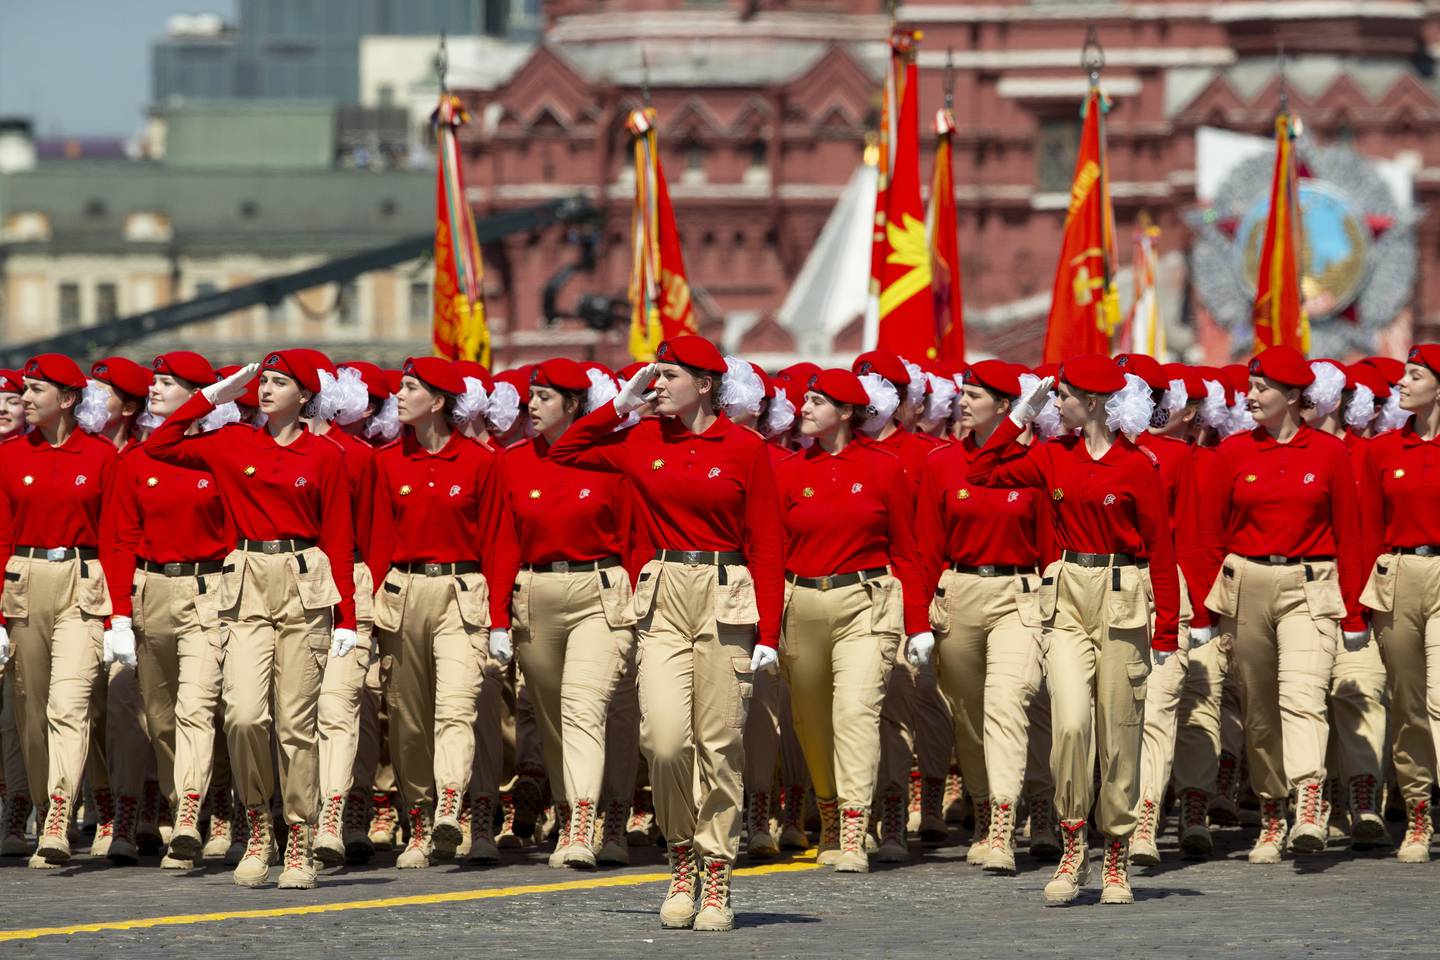 Members of Yunarmia (Young Army), an organization sponsored by the Russian military that aims to encourage patriotism among the Russian youth march in Red Square during the Victory Day military parade marking the 75th anniversary of the Nazi defeat in WWII in Moscow, Russia, Wednesday, June 24, 2020. The Victory Day parade normally is held on May 9, the nation's most important secular holiday, but this year it was postponed due to the coronavirus pandemic. (AP Photo/Alexander Zemlianichenko)